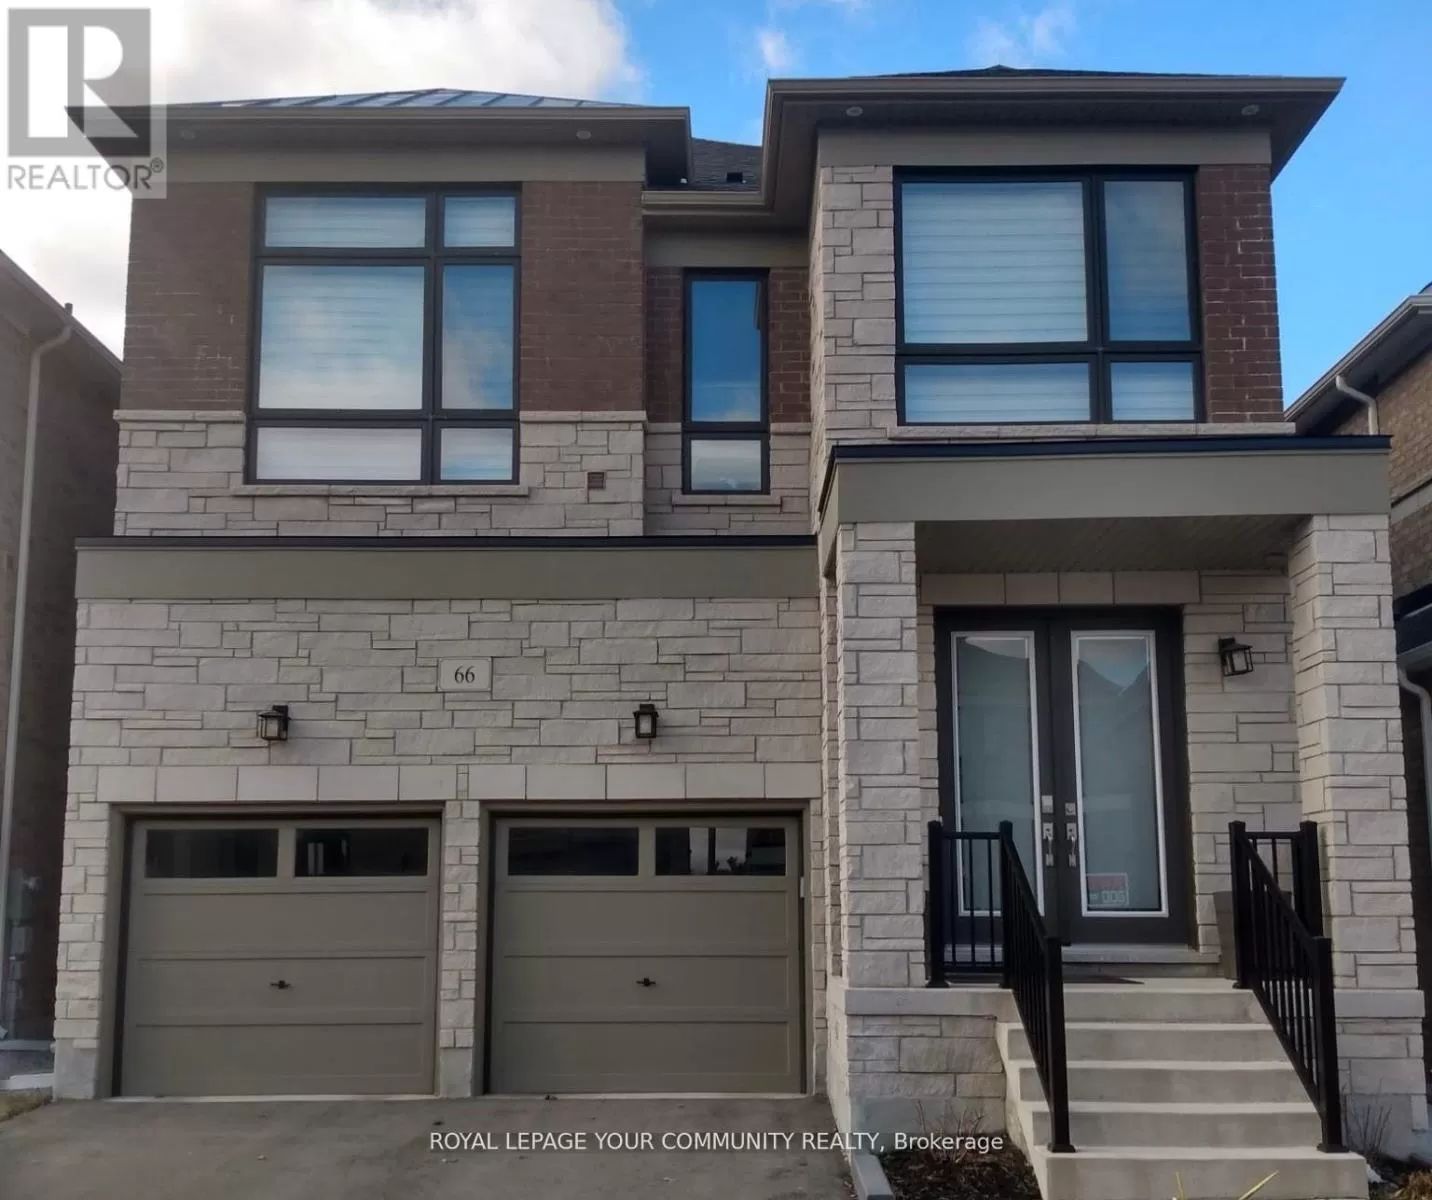 House for rent: 66 Woodhaven Ave, Aurora, Ontario L4G 3Y2